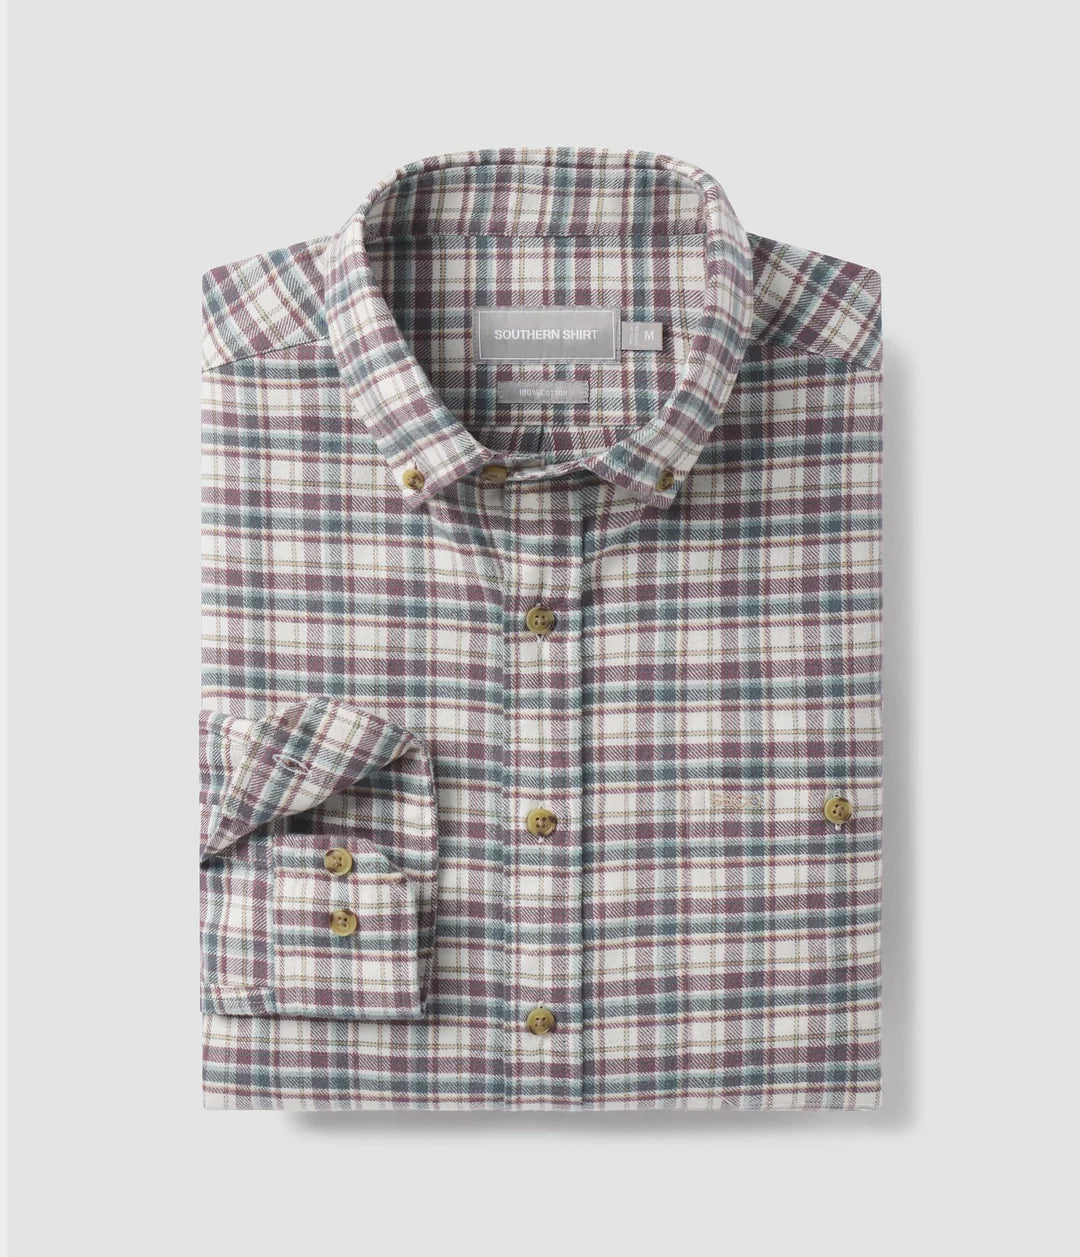 Southern Shirt Co.-Sequoia Flannel, Sequoia